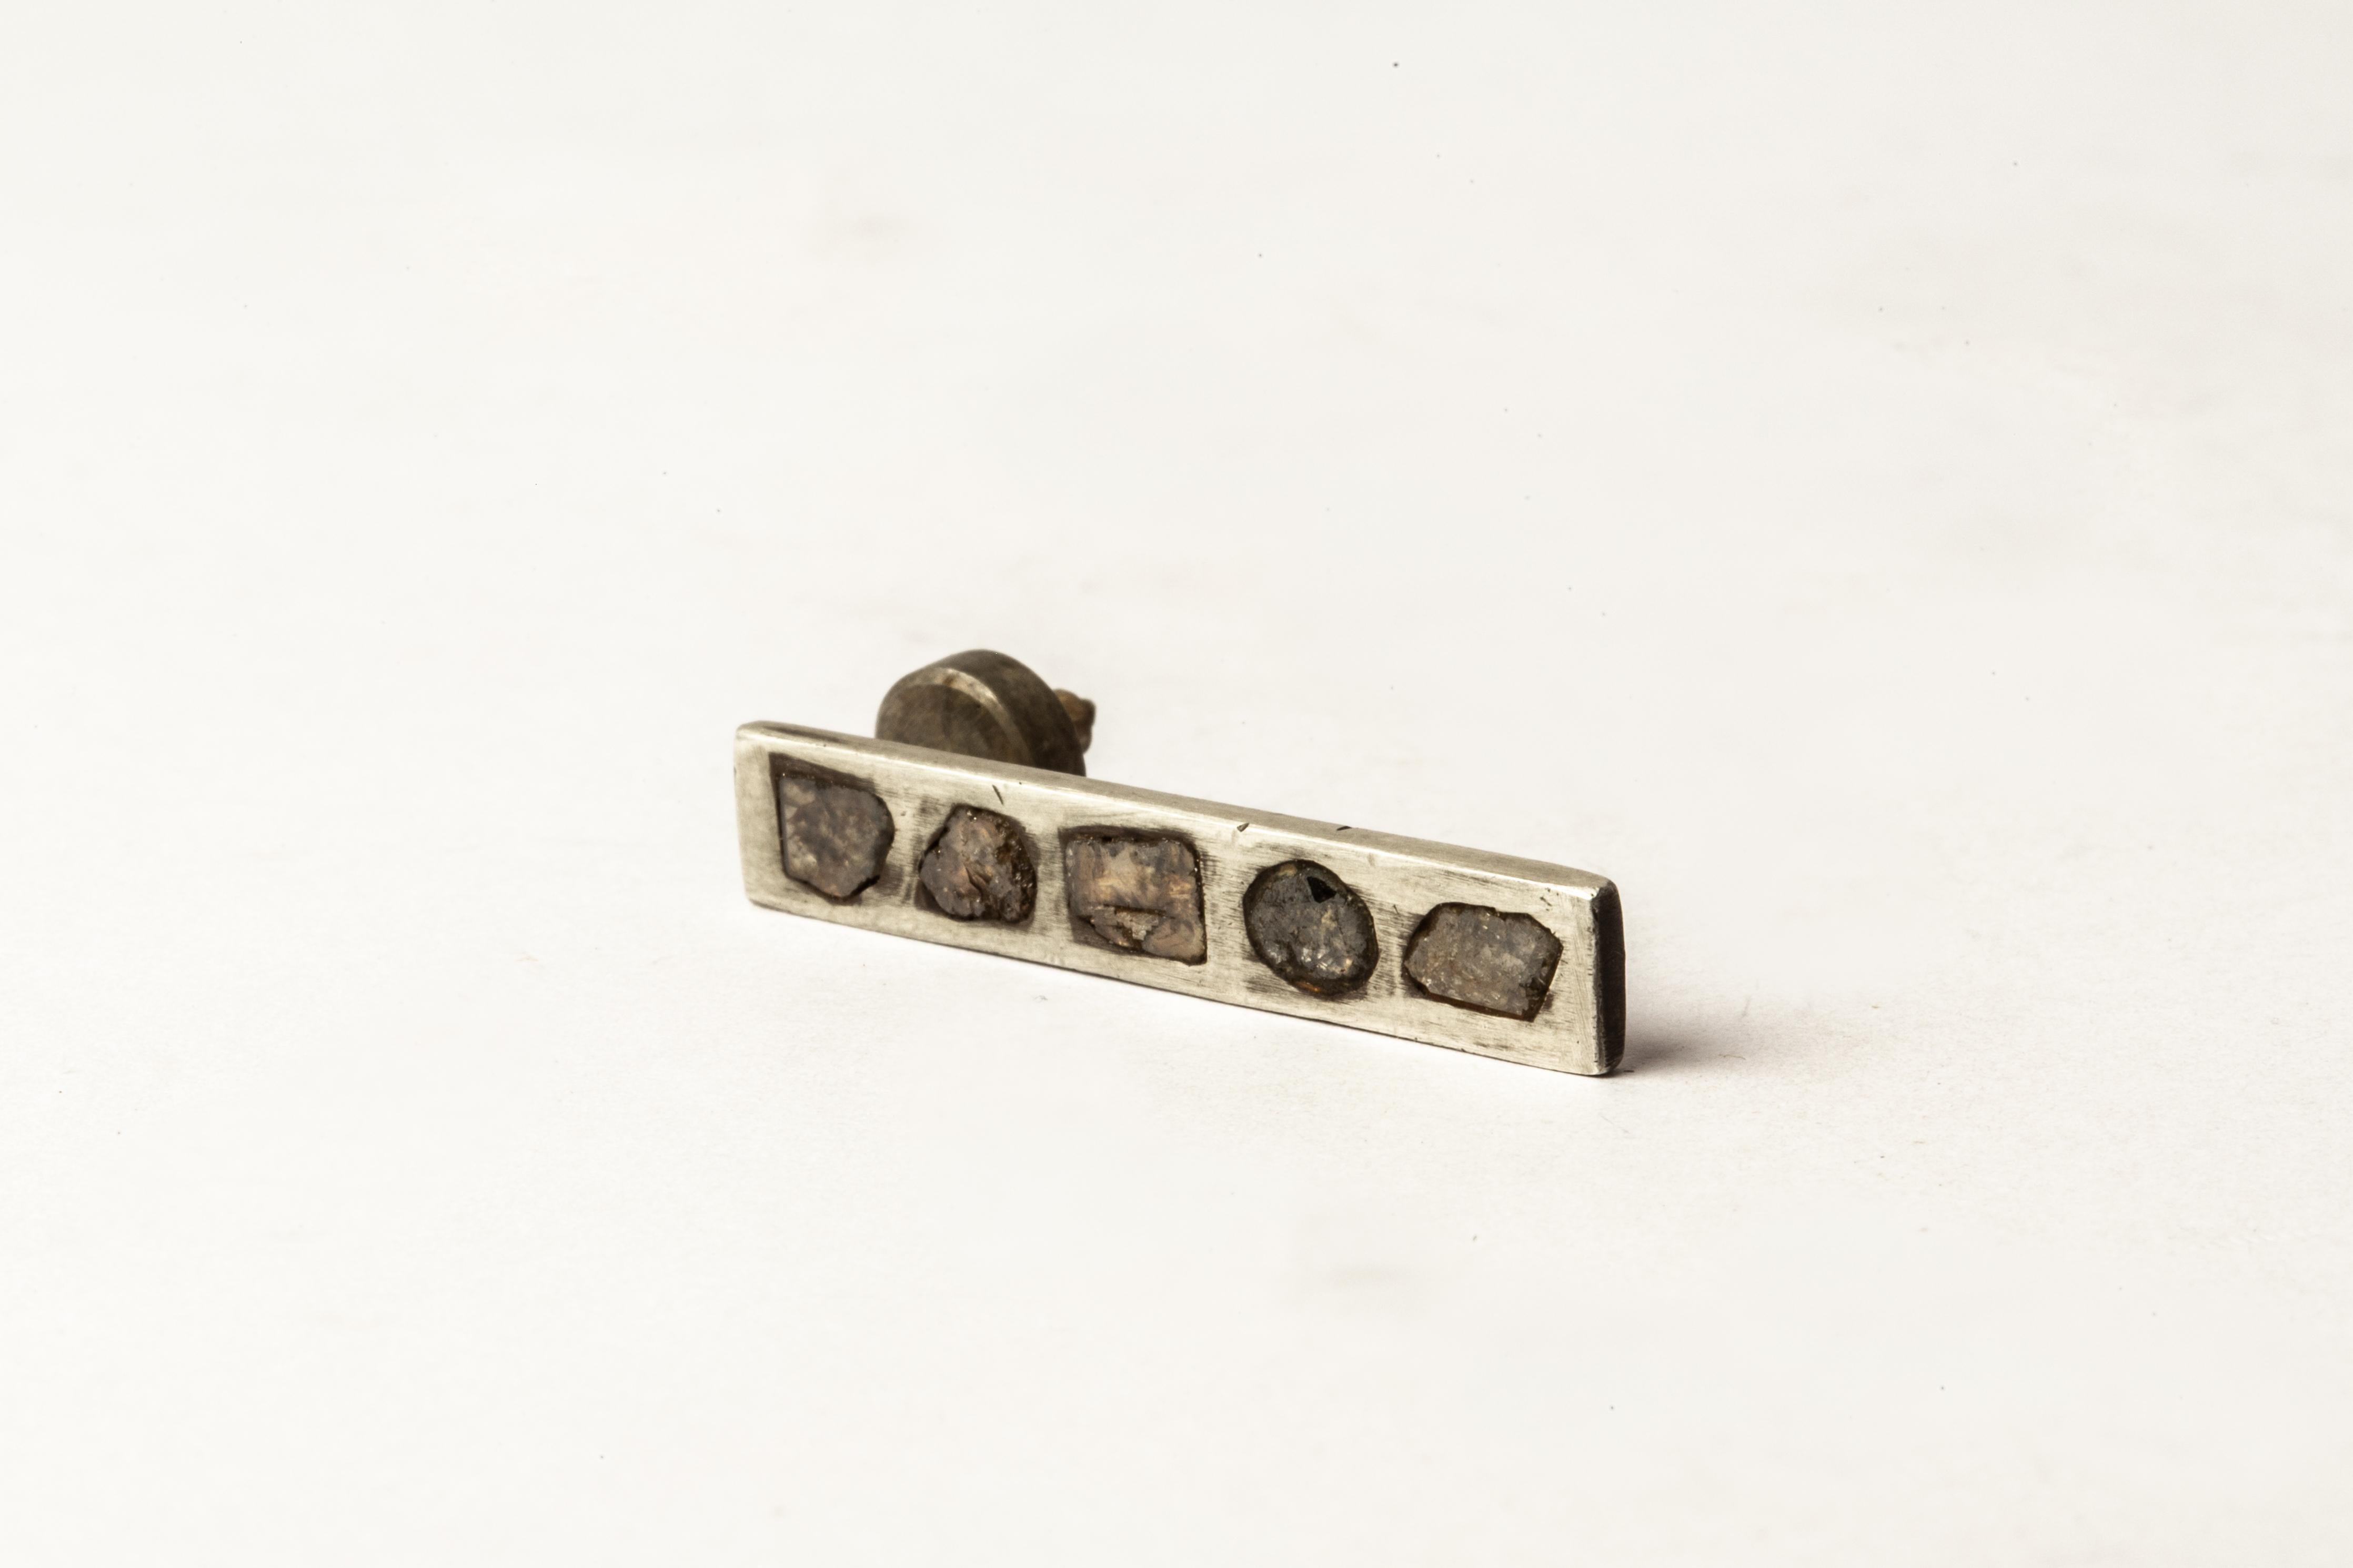 Earring in the shape of Plate in sterling silver and slabs of rough diamond. These slabs are removed from a larger chunk of diamond. This item is made with a naturally occurring element and will vary from the photograph you see. Each stone fragment